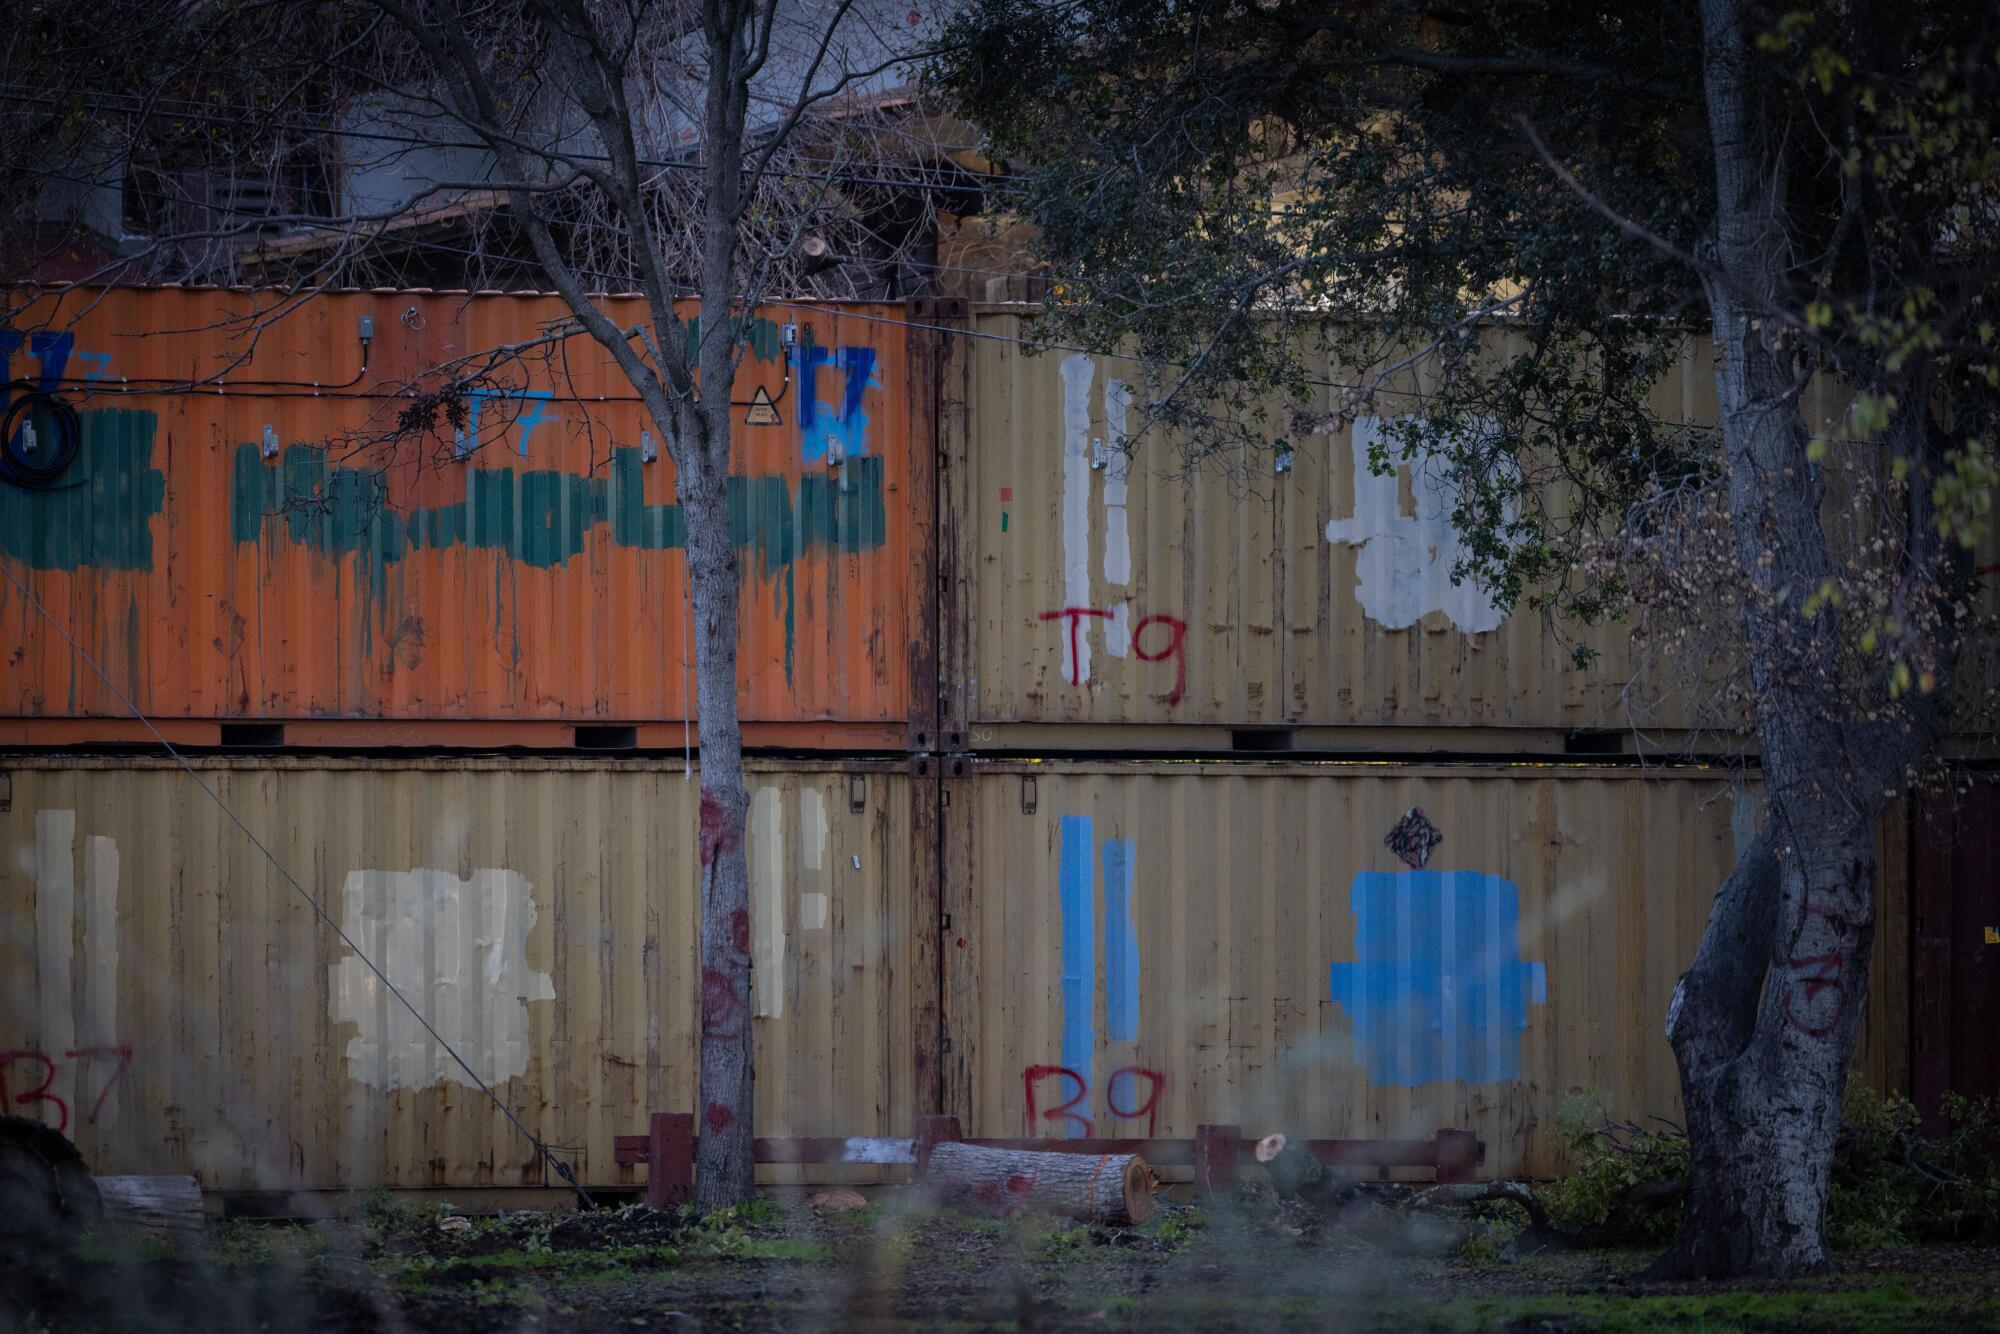 Double-stacked cargo containers at People's Park 